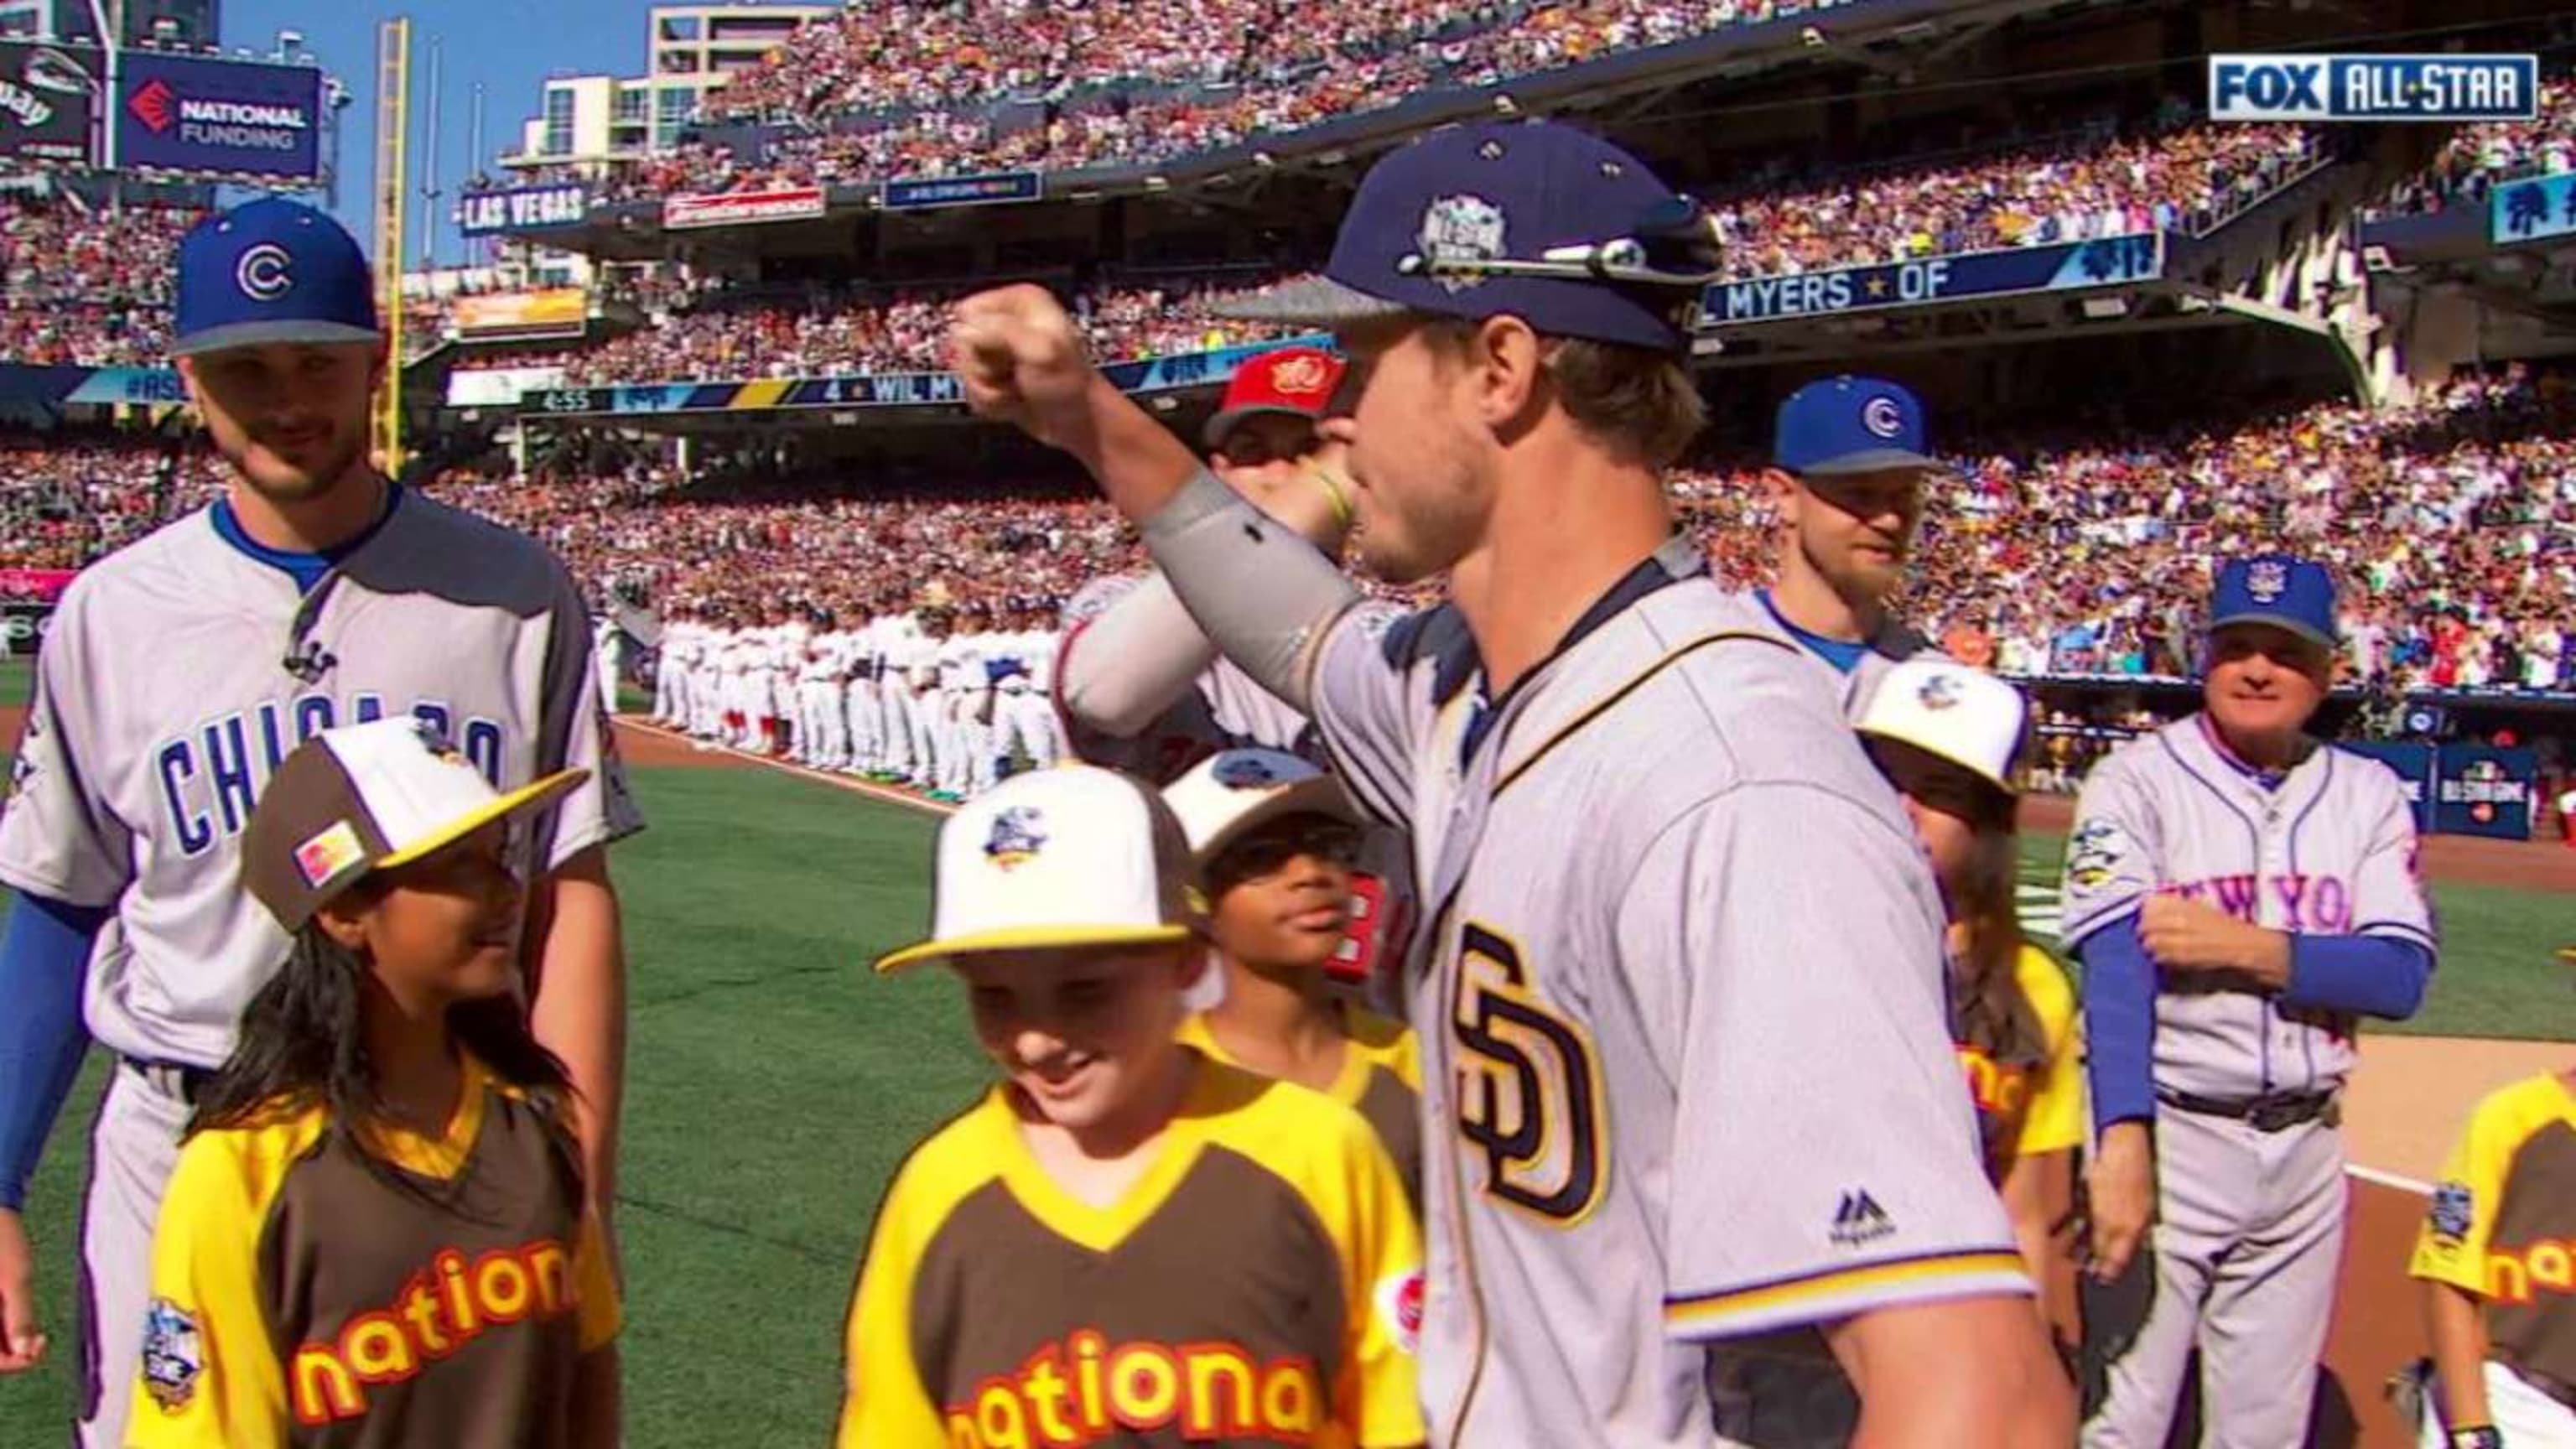 Former ALL-USA baseball player Wil Myers back in the groove with the Padres